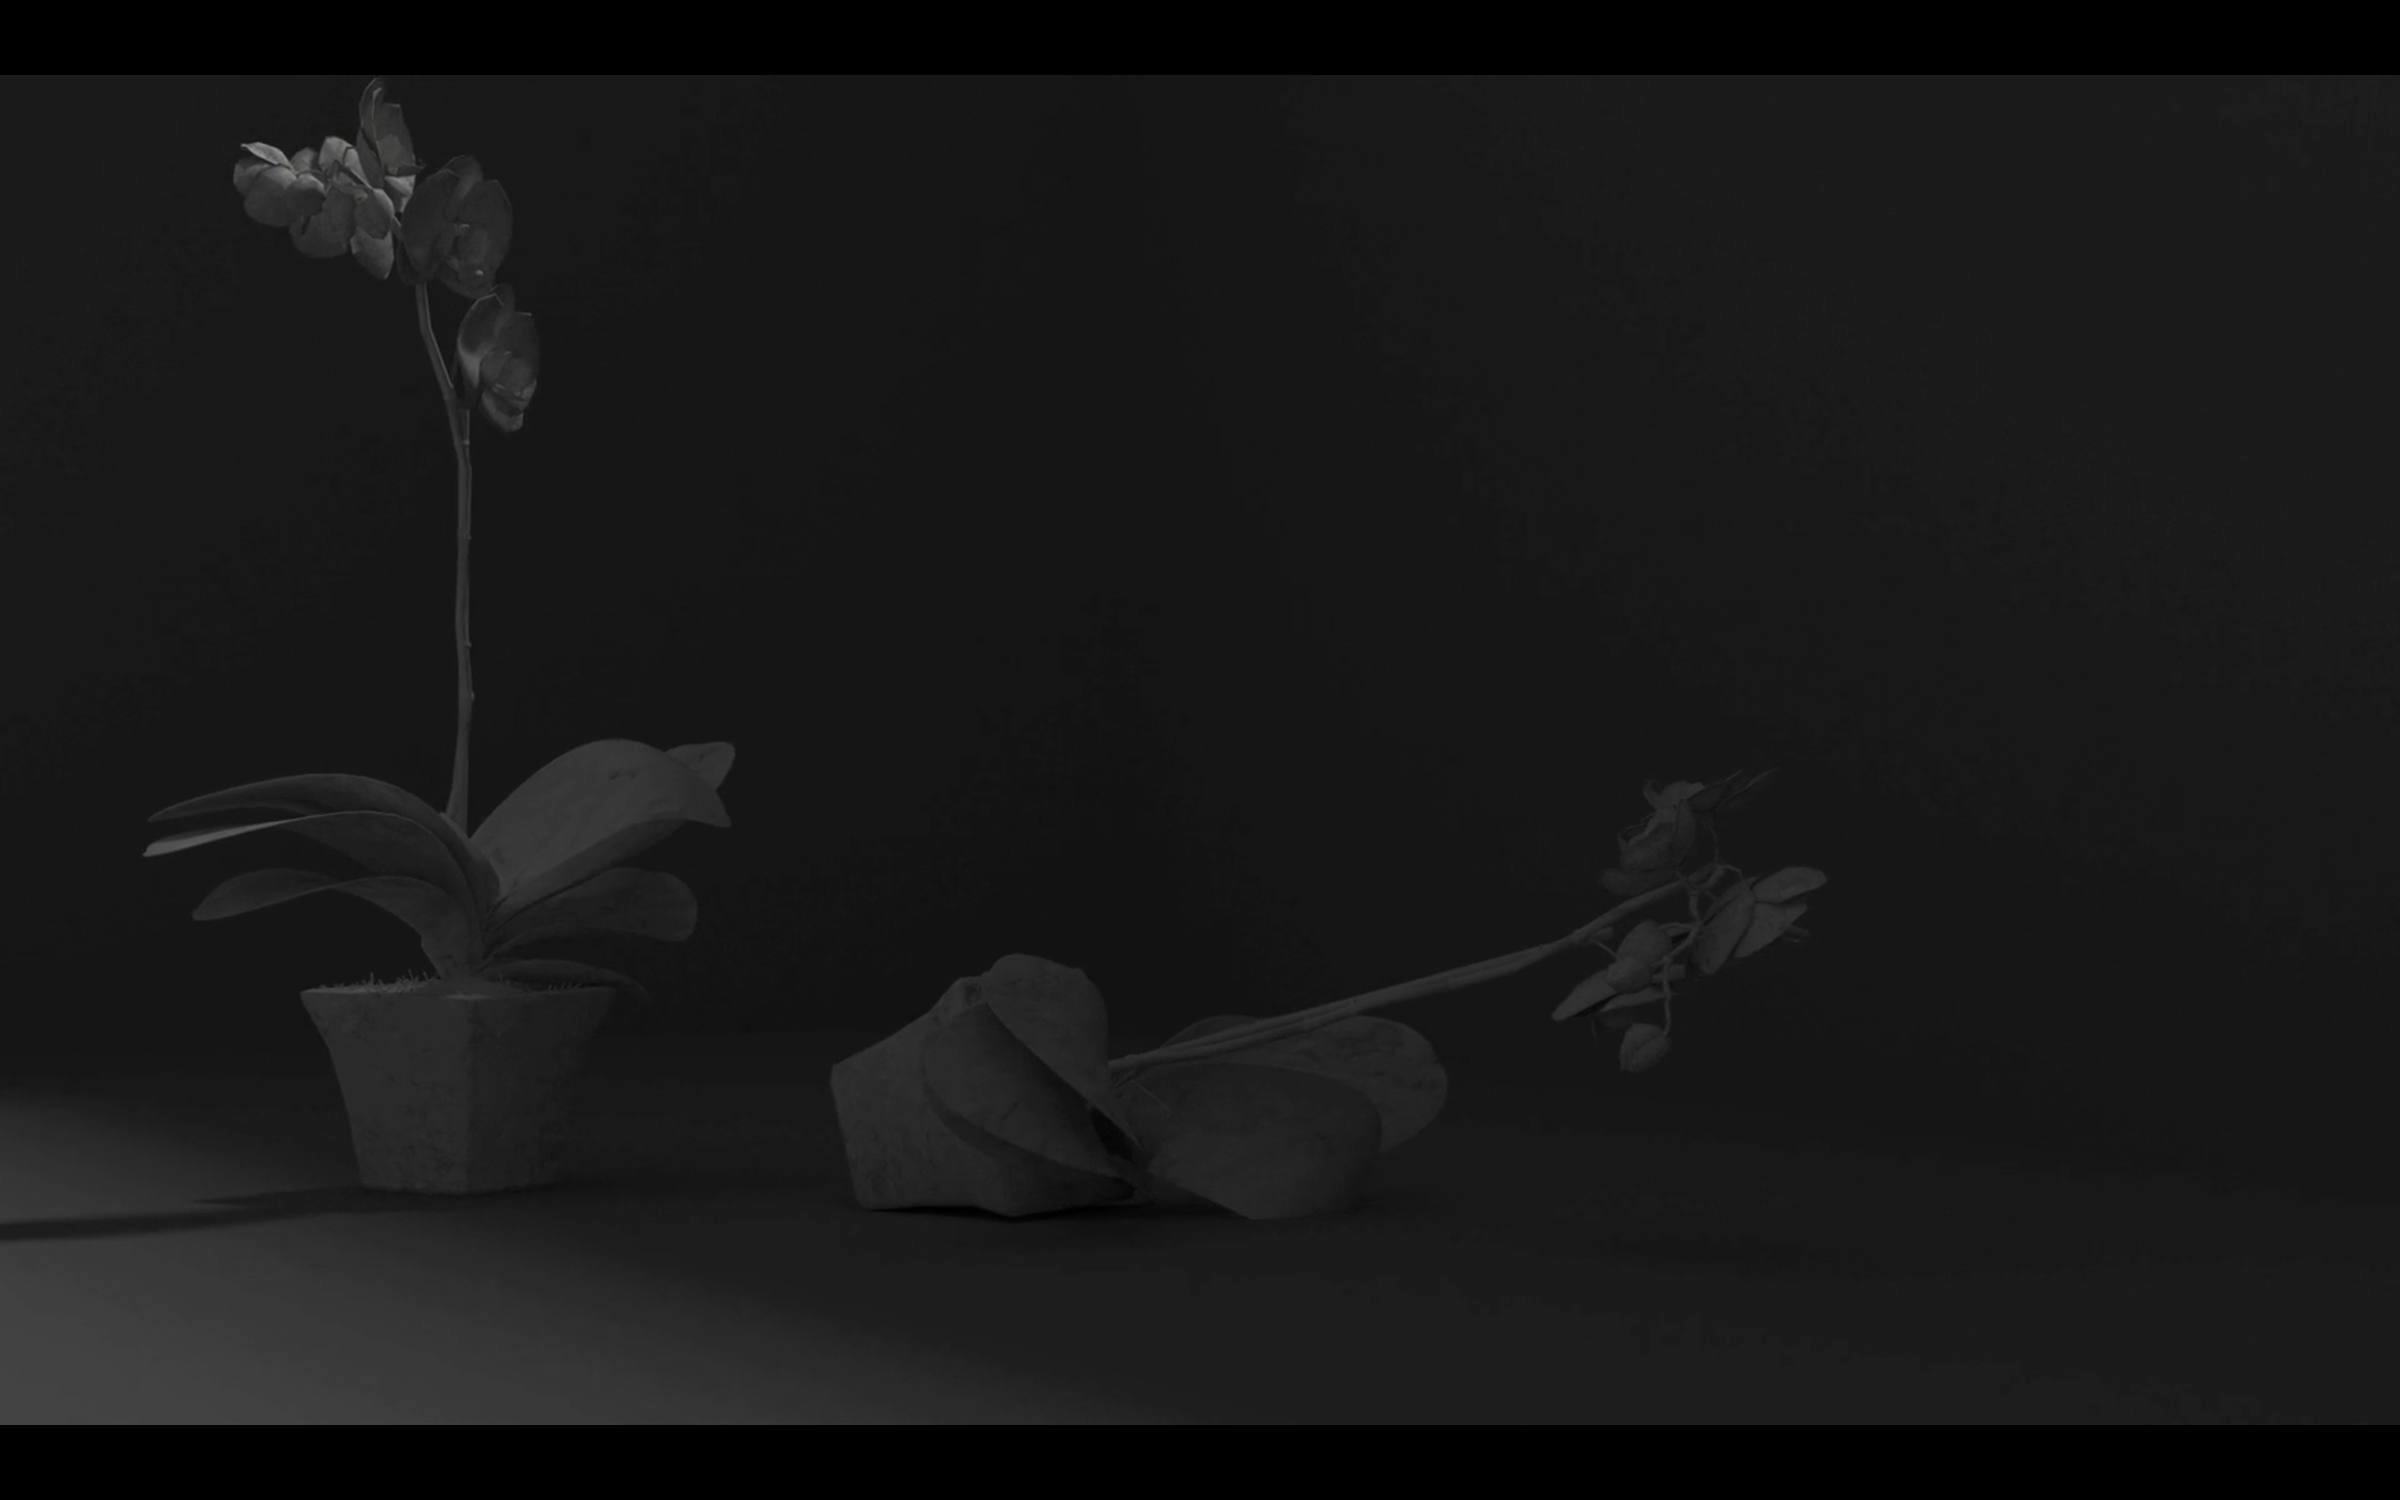 a digitally rendered black and white image of 2 flowers in pots. One of the pots has fallen over